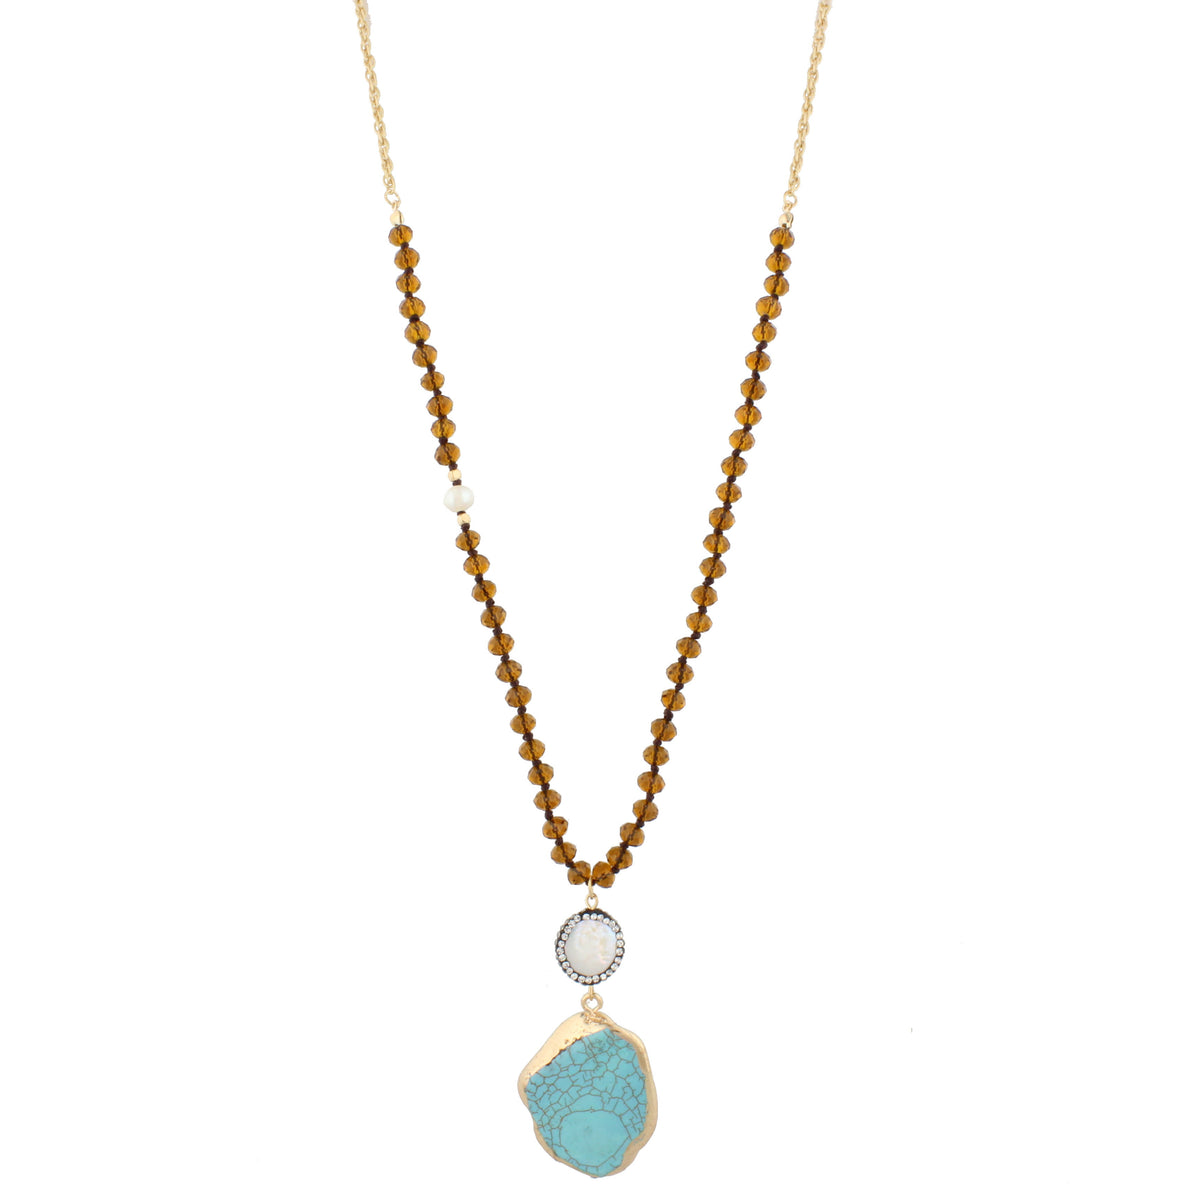 32" Topaz Beads and Gold Chain Necklace with Electroplated Turquoise Stone - Debs Boutique  LLC